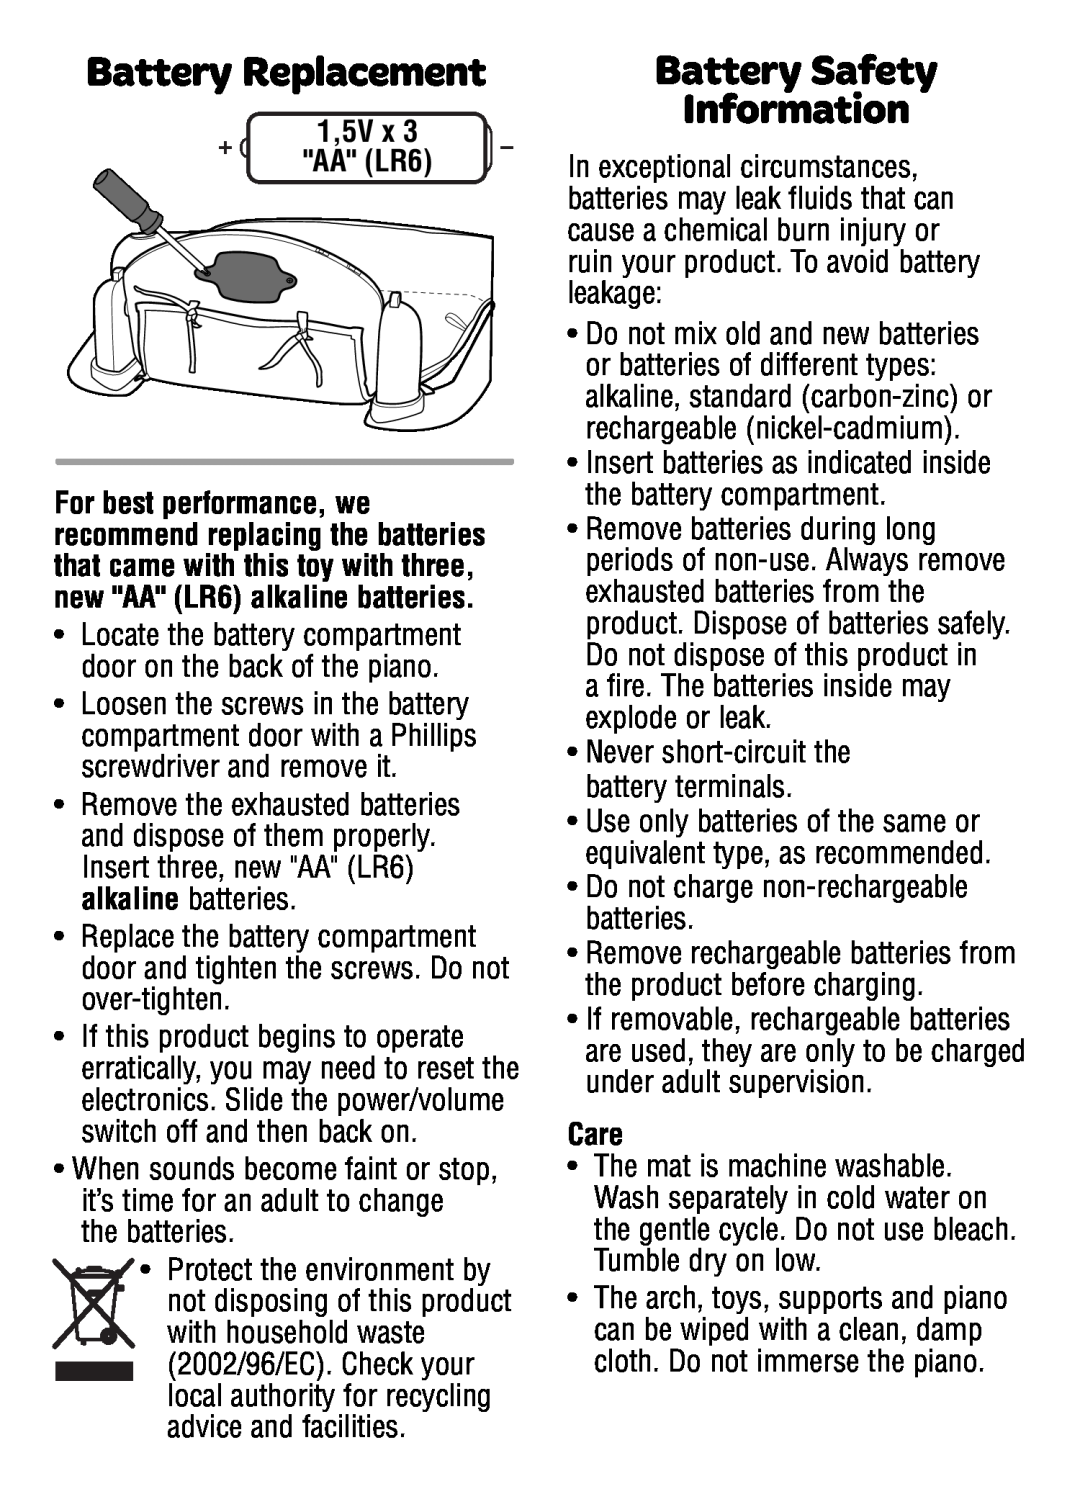 Fisher-Price W2621 instruction sheet Battery Replacement, Battery Safety Information, 1,5V x AA LR6, Care 